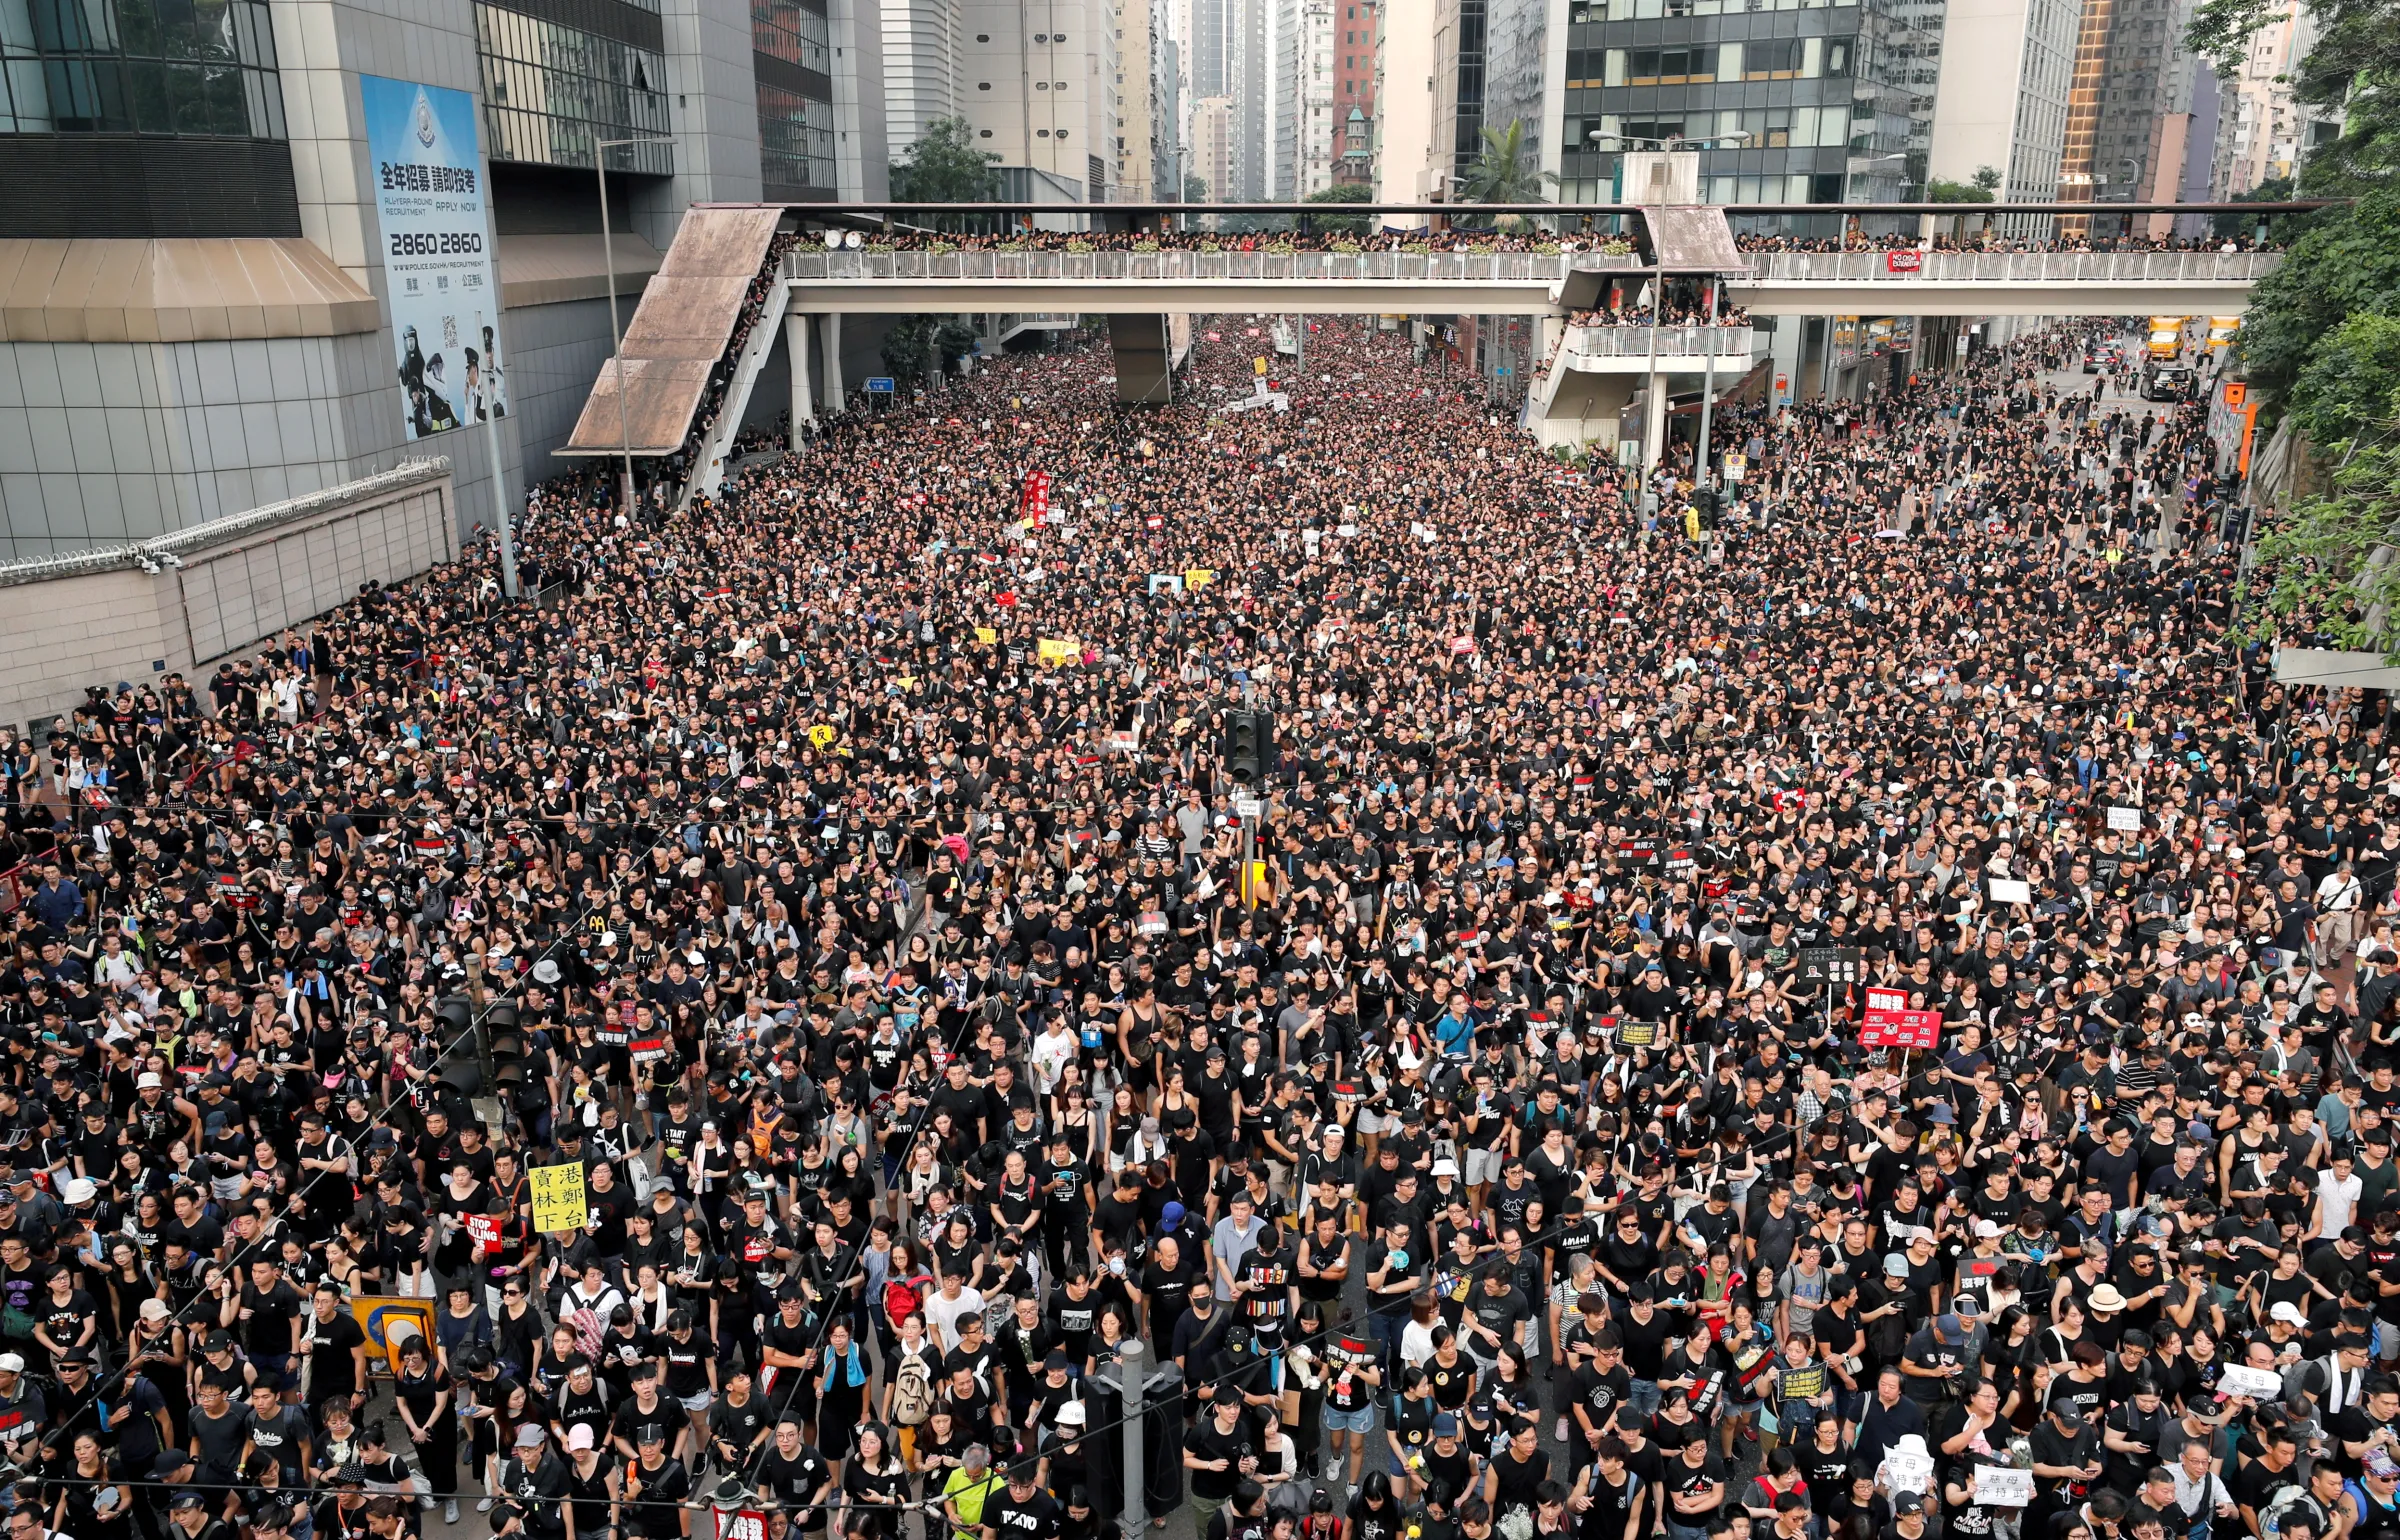 Protesters attend a demonstration demanding Hong Kong's leaders step down and withdraw the extradition bill, in Hong Kong, China, June 16, 2019. REUTERS/Tyrone Siu